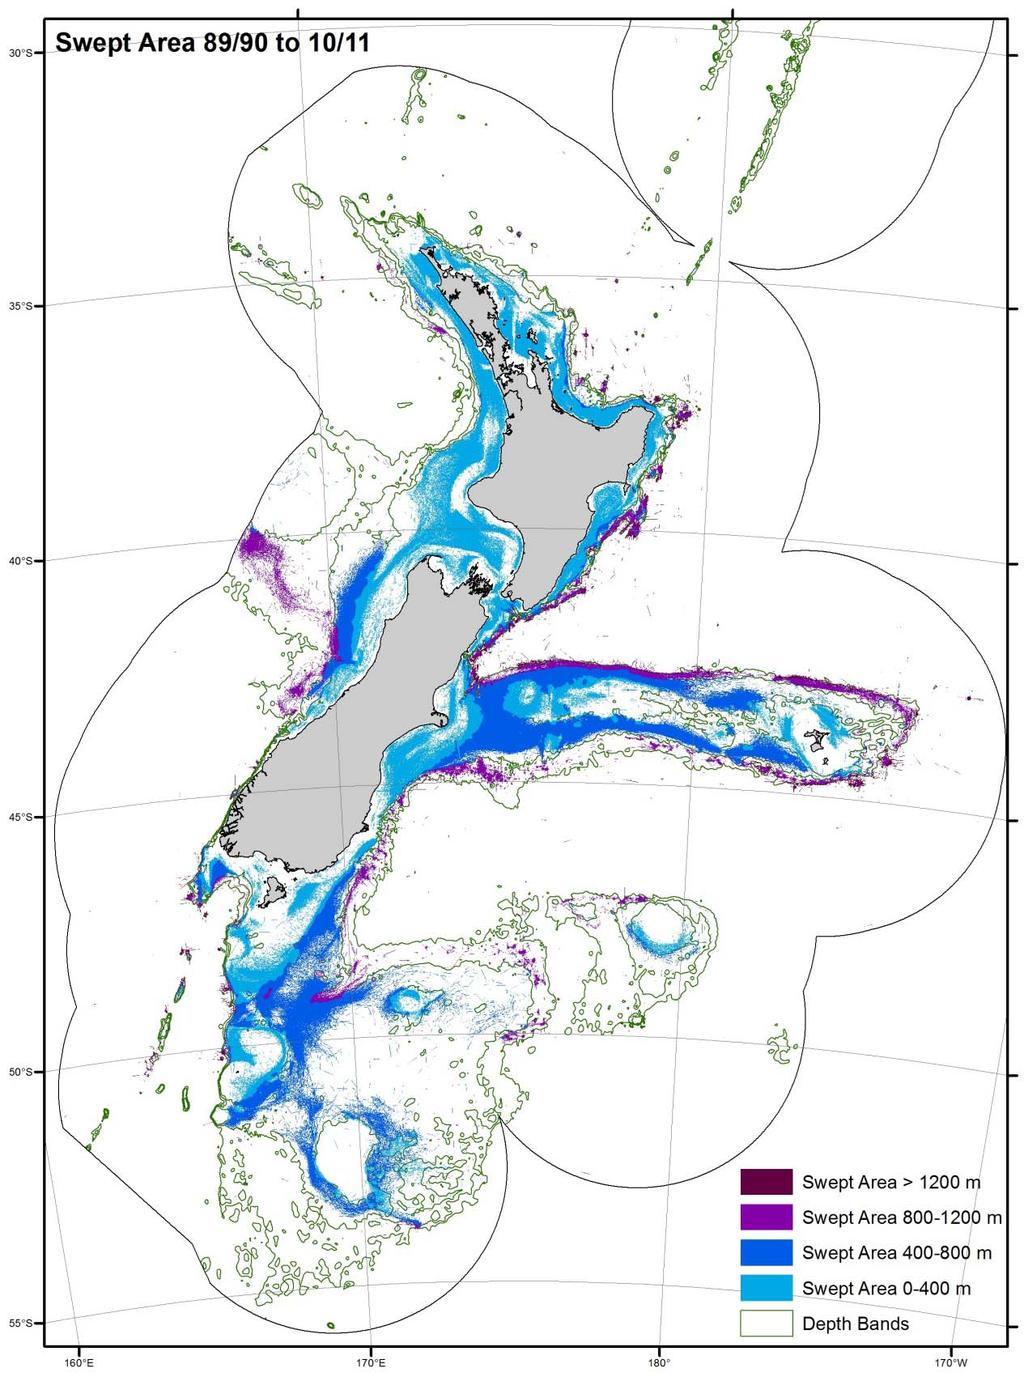 Figure 15: Swept area coloured by depth zone (400, 800 and 1200 m contours are shown).